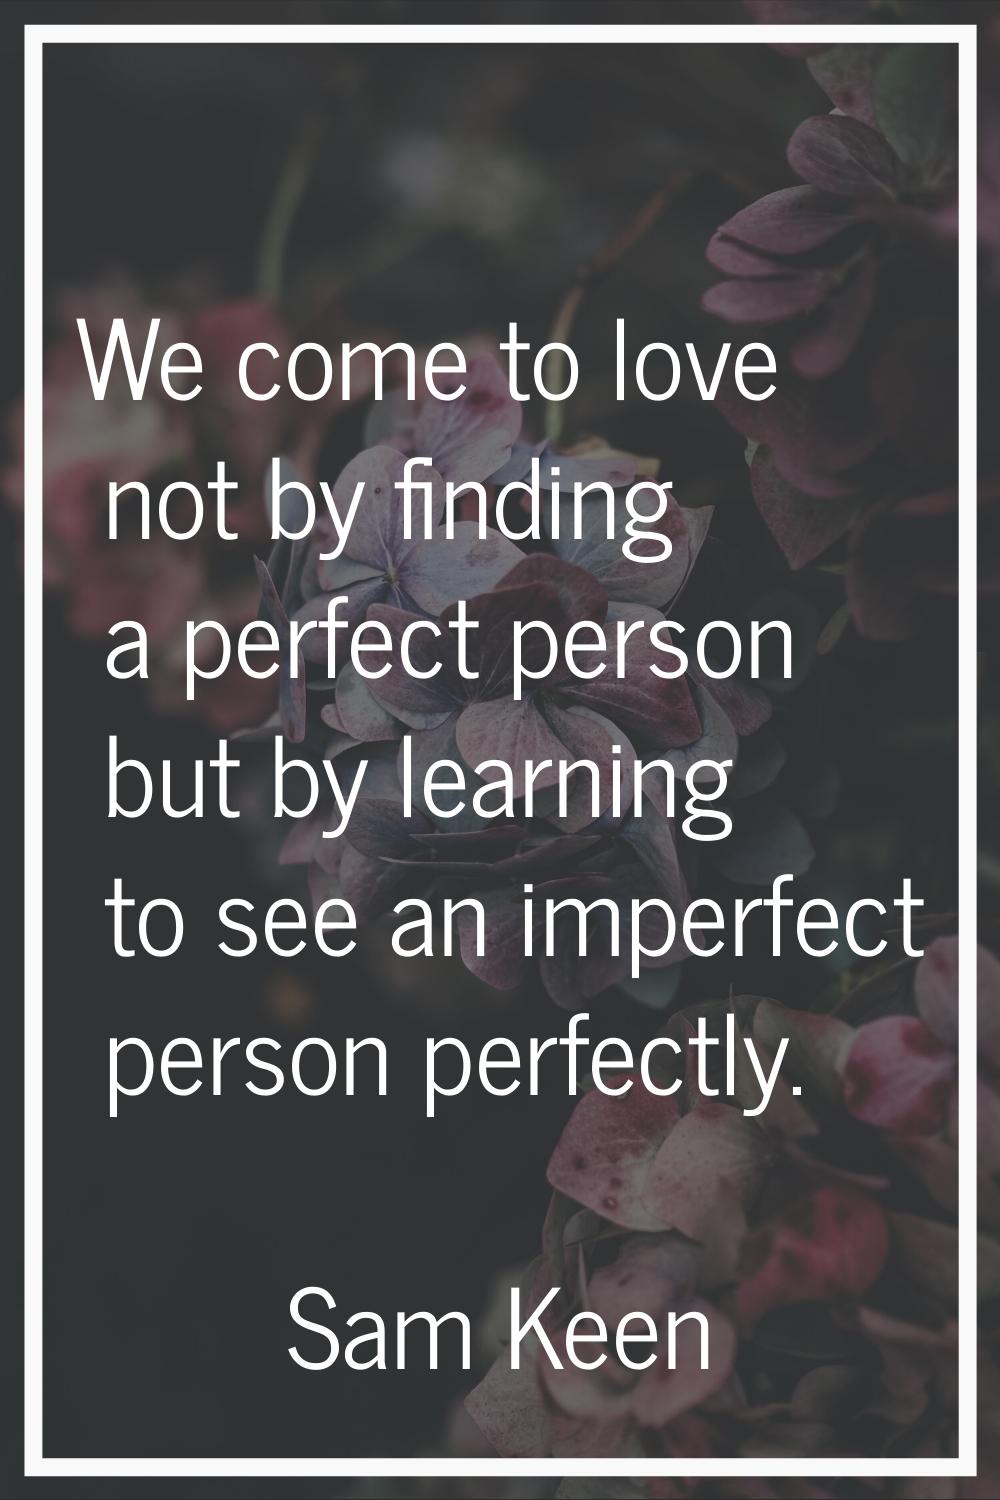 We come to love not by finding a perfect person but by learning to see an imperfect person perfectl